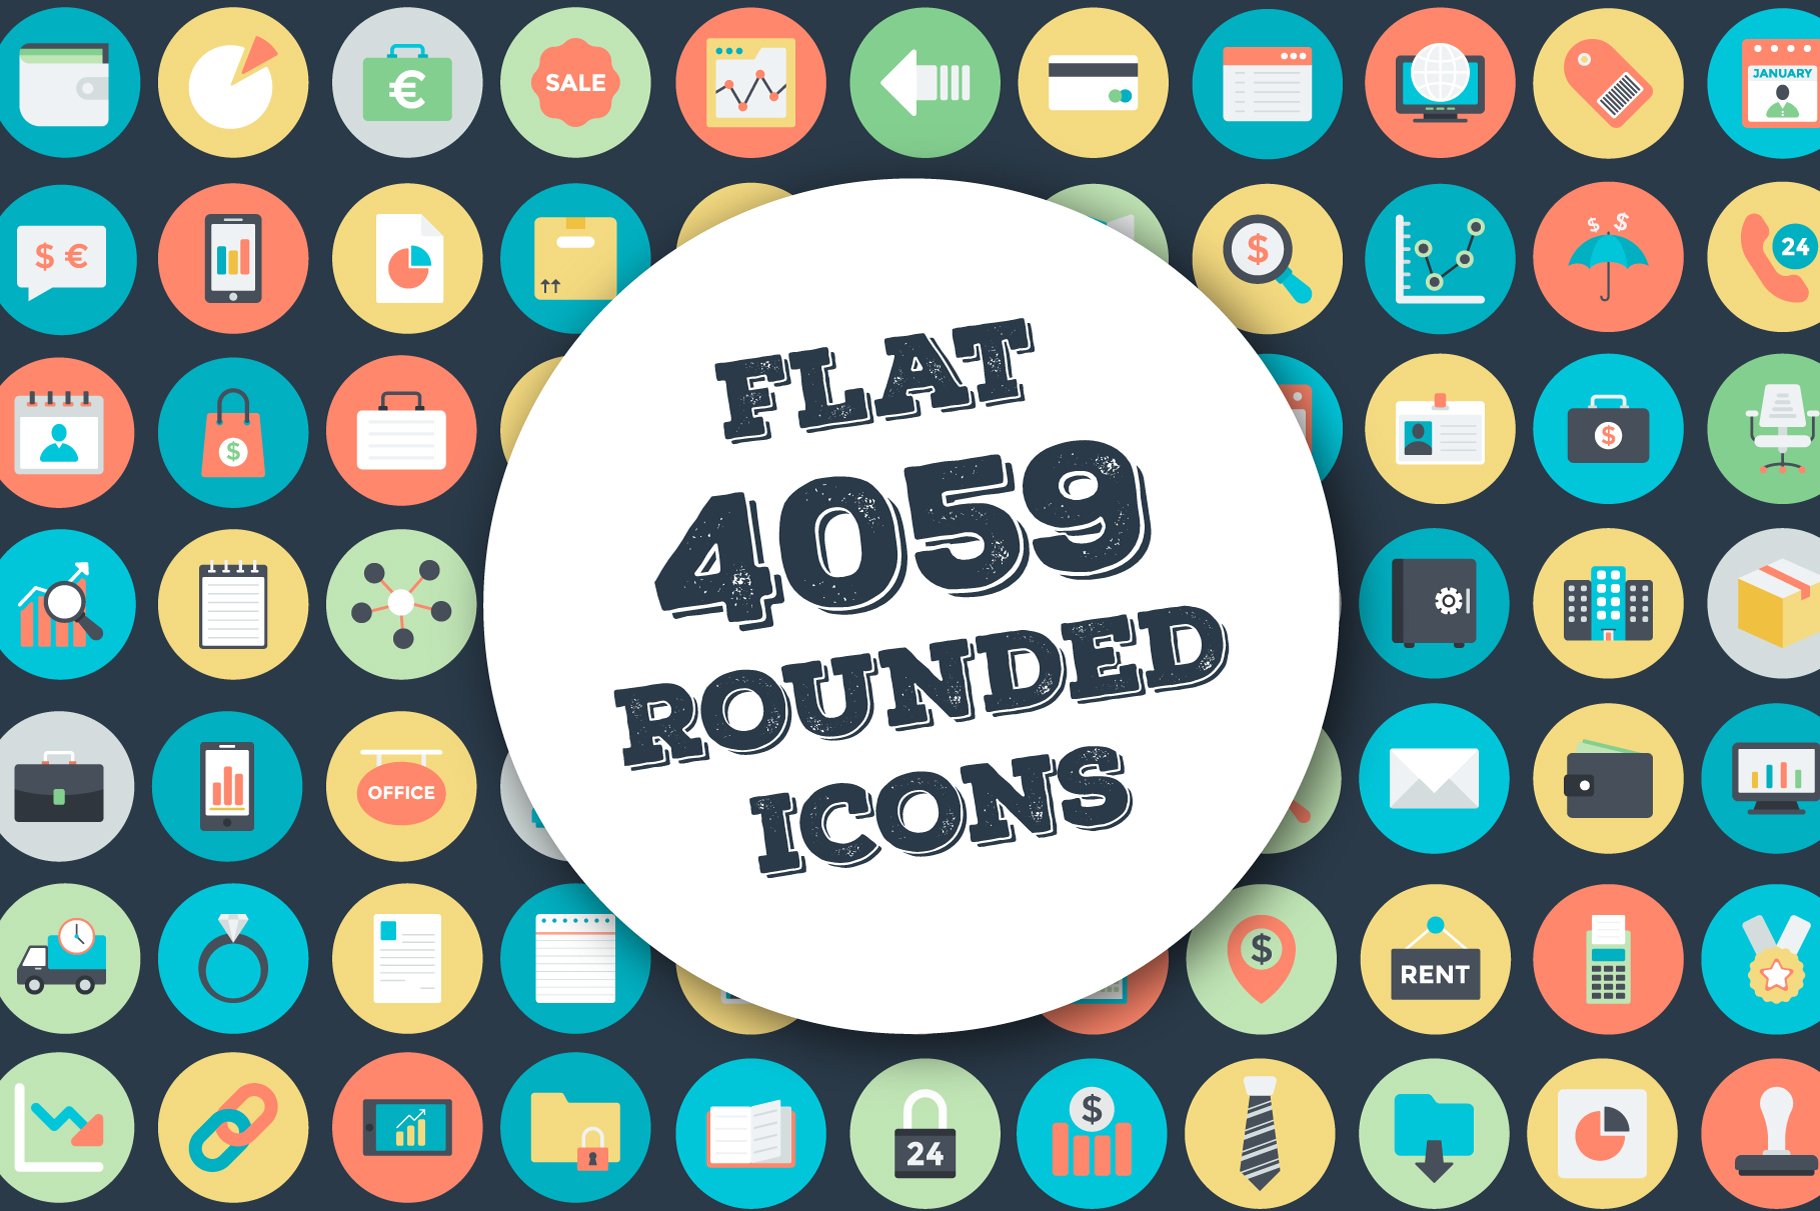 Use this huge icons collection for your project.